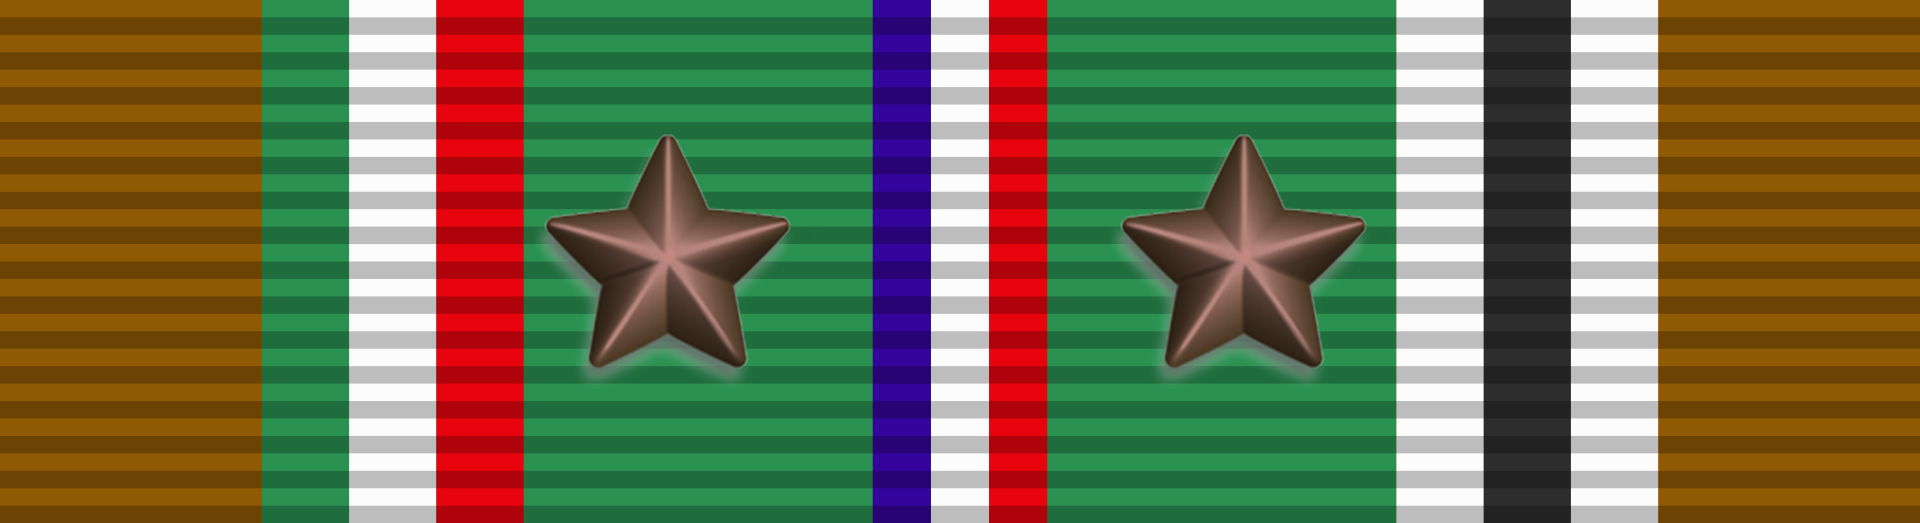 European African Middle Eastern Campaign Medal with two Bronze campaign stars